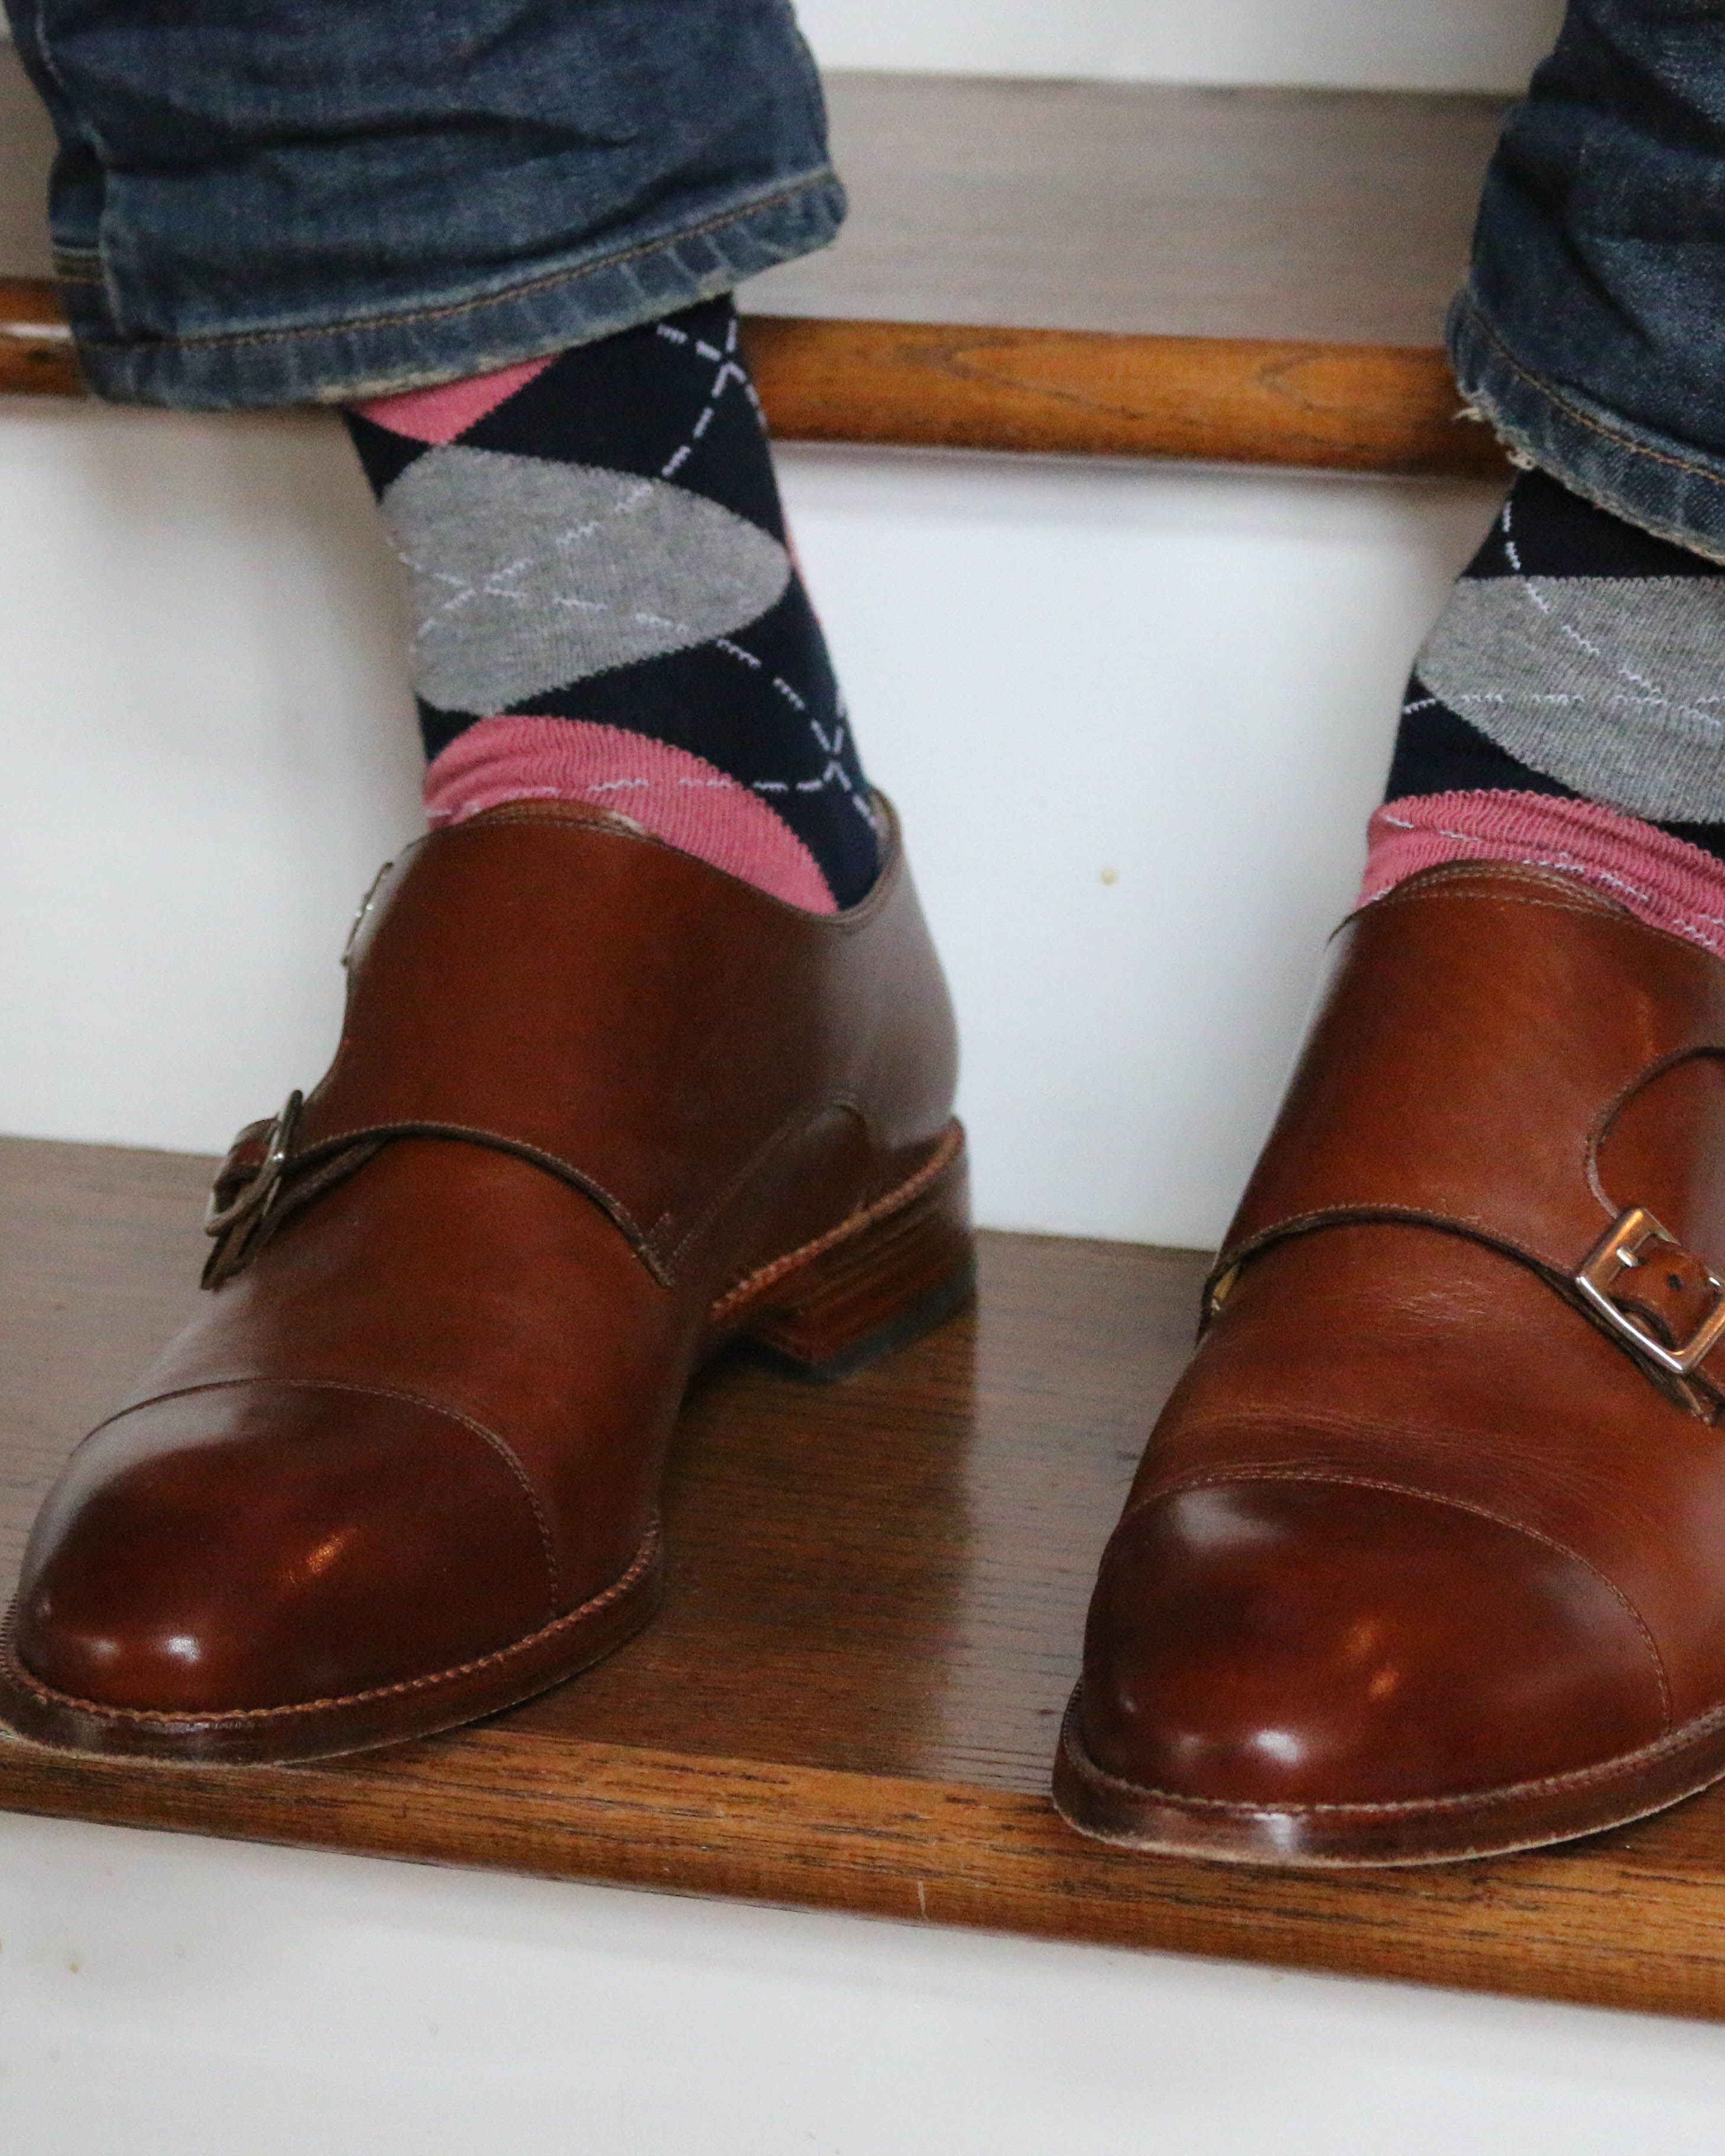 blue pink and grey argyle print over the calf dress socks, brown dress shoes, blue jeans, on stairs